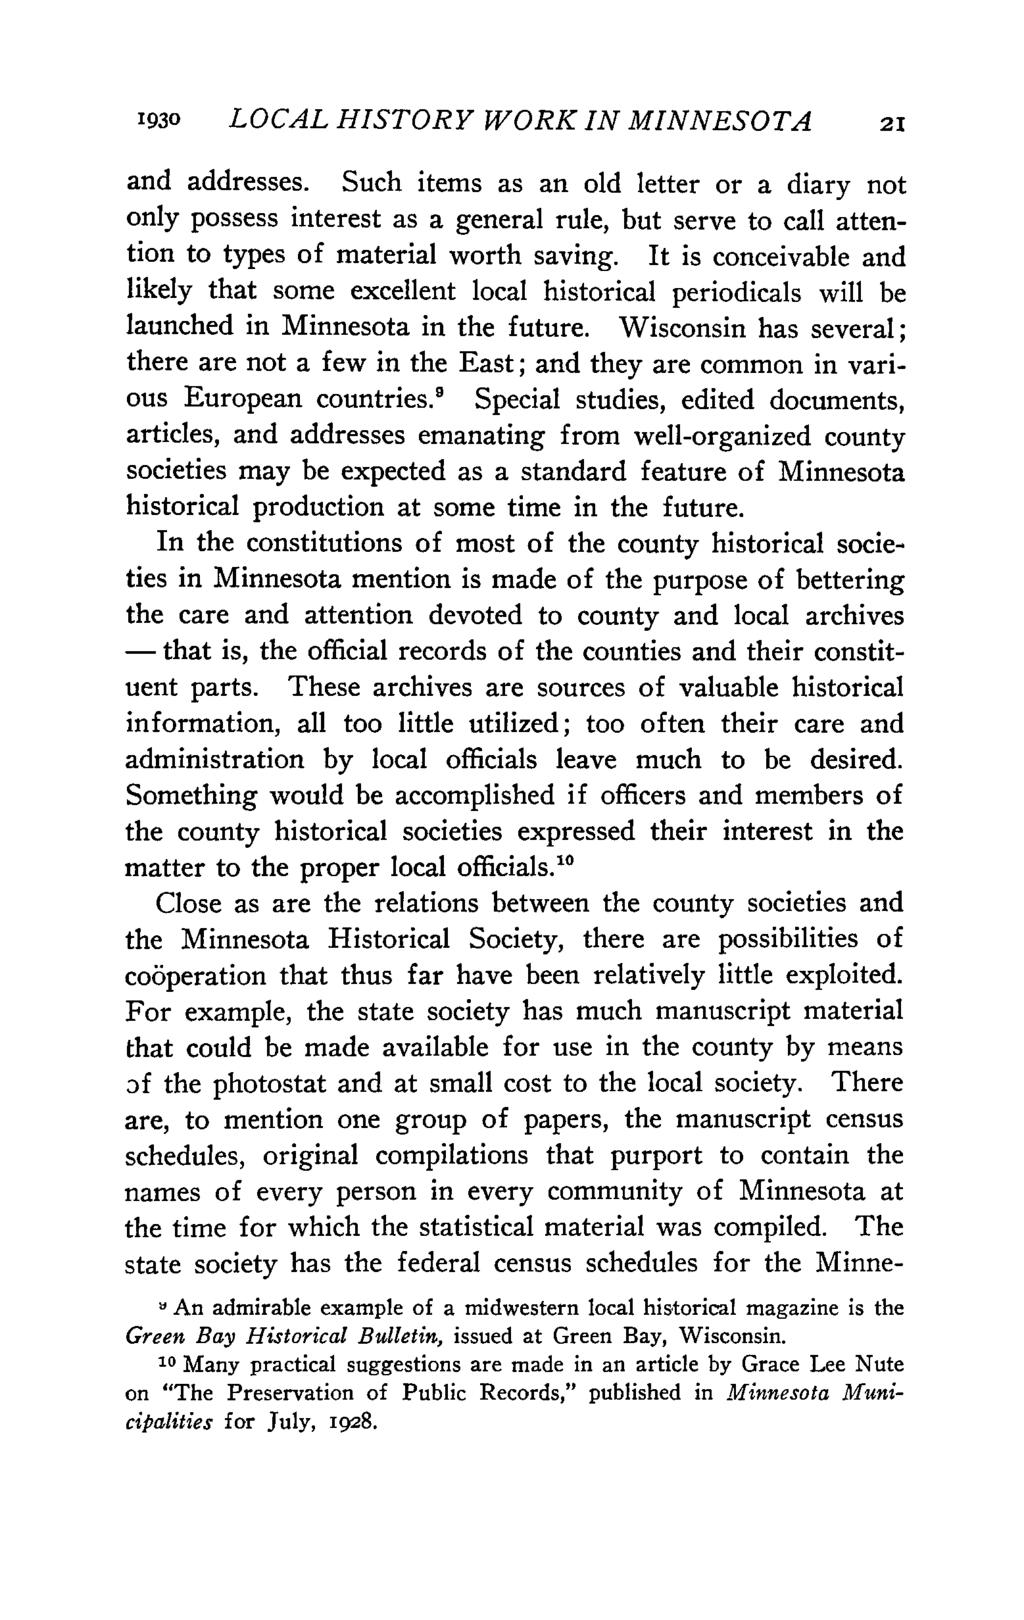 1930 LOCALHISTORY WORK IN MINNESOTA 21 and addresses. Such items as an old letter or a diary not only possess interest as a general rule, but serve to call attention to types of material worth saving.